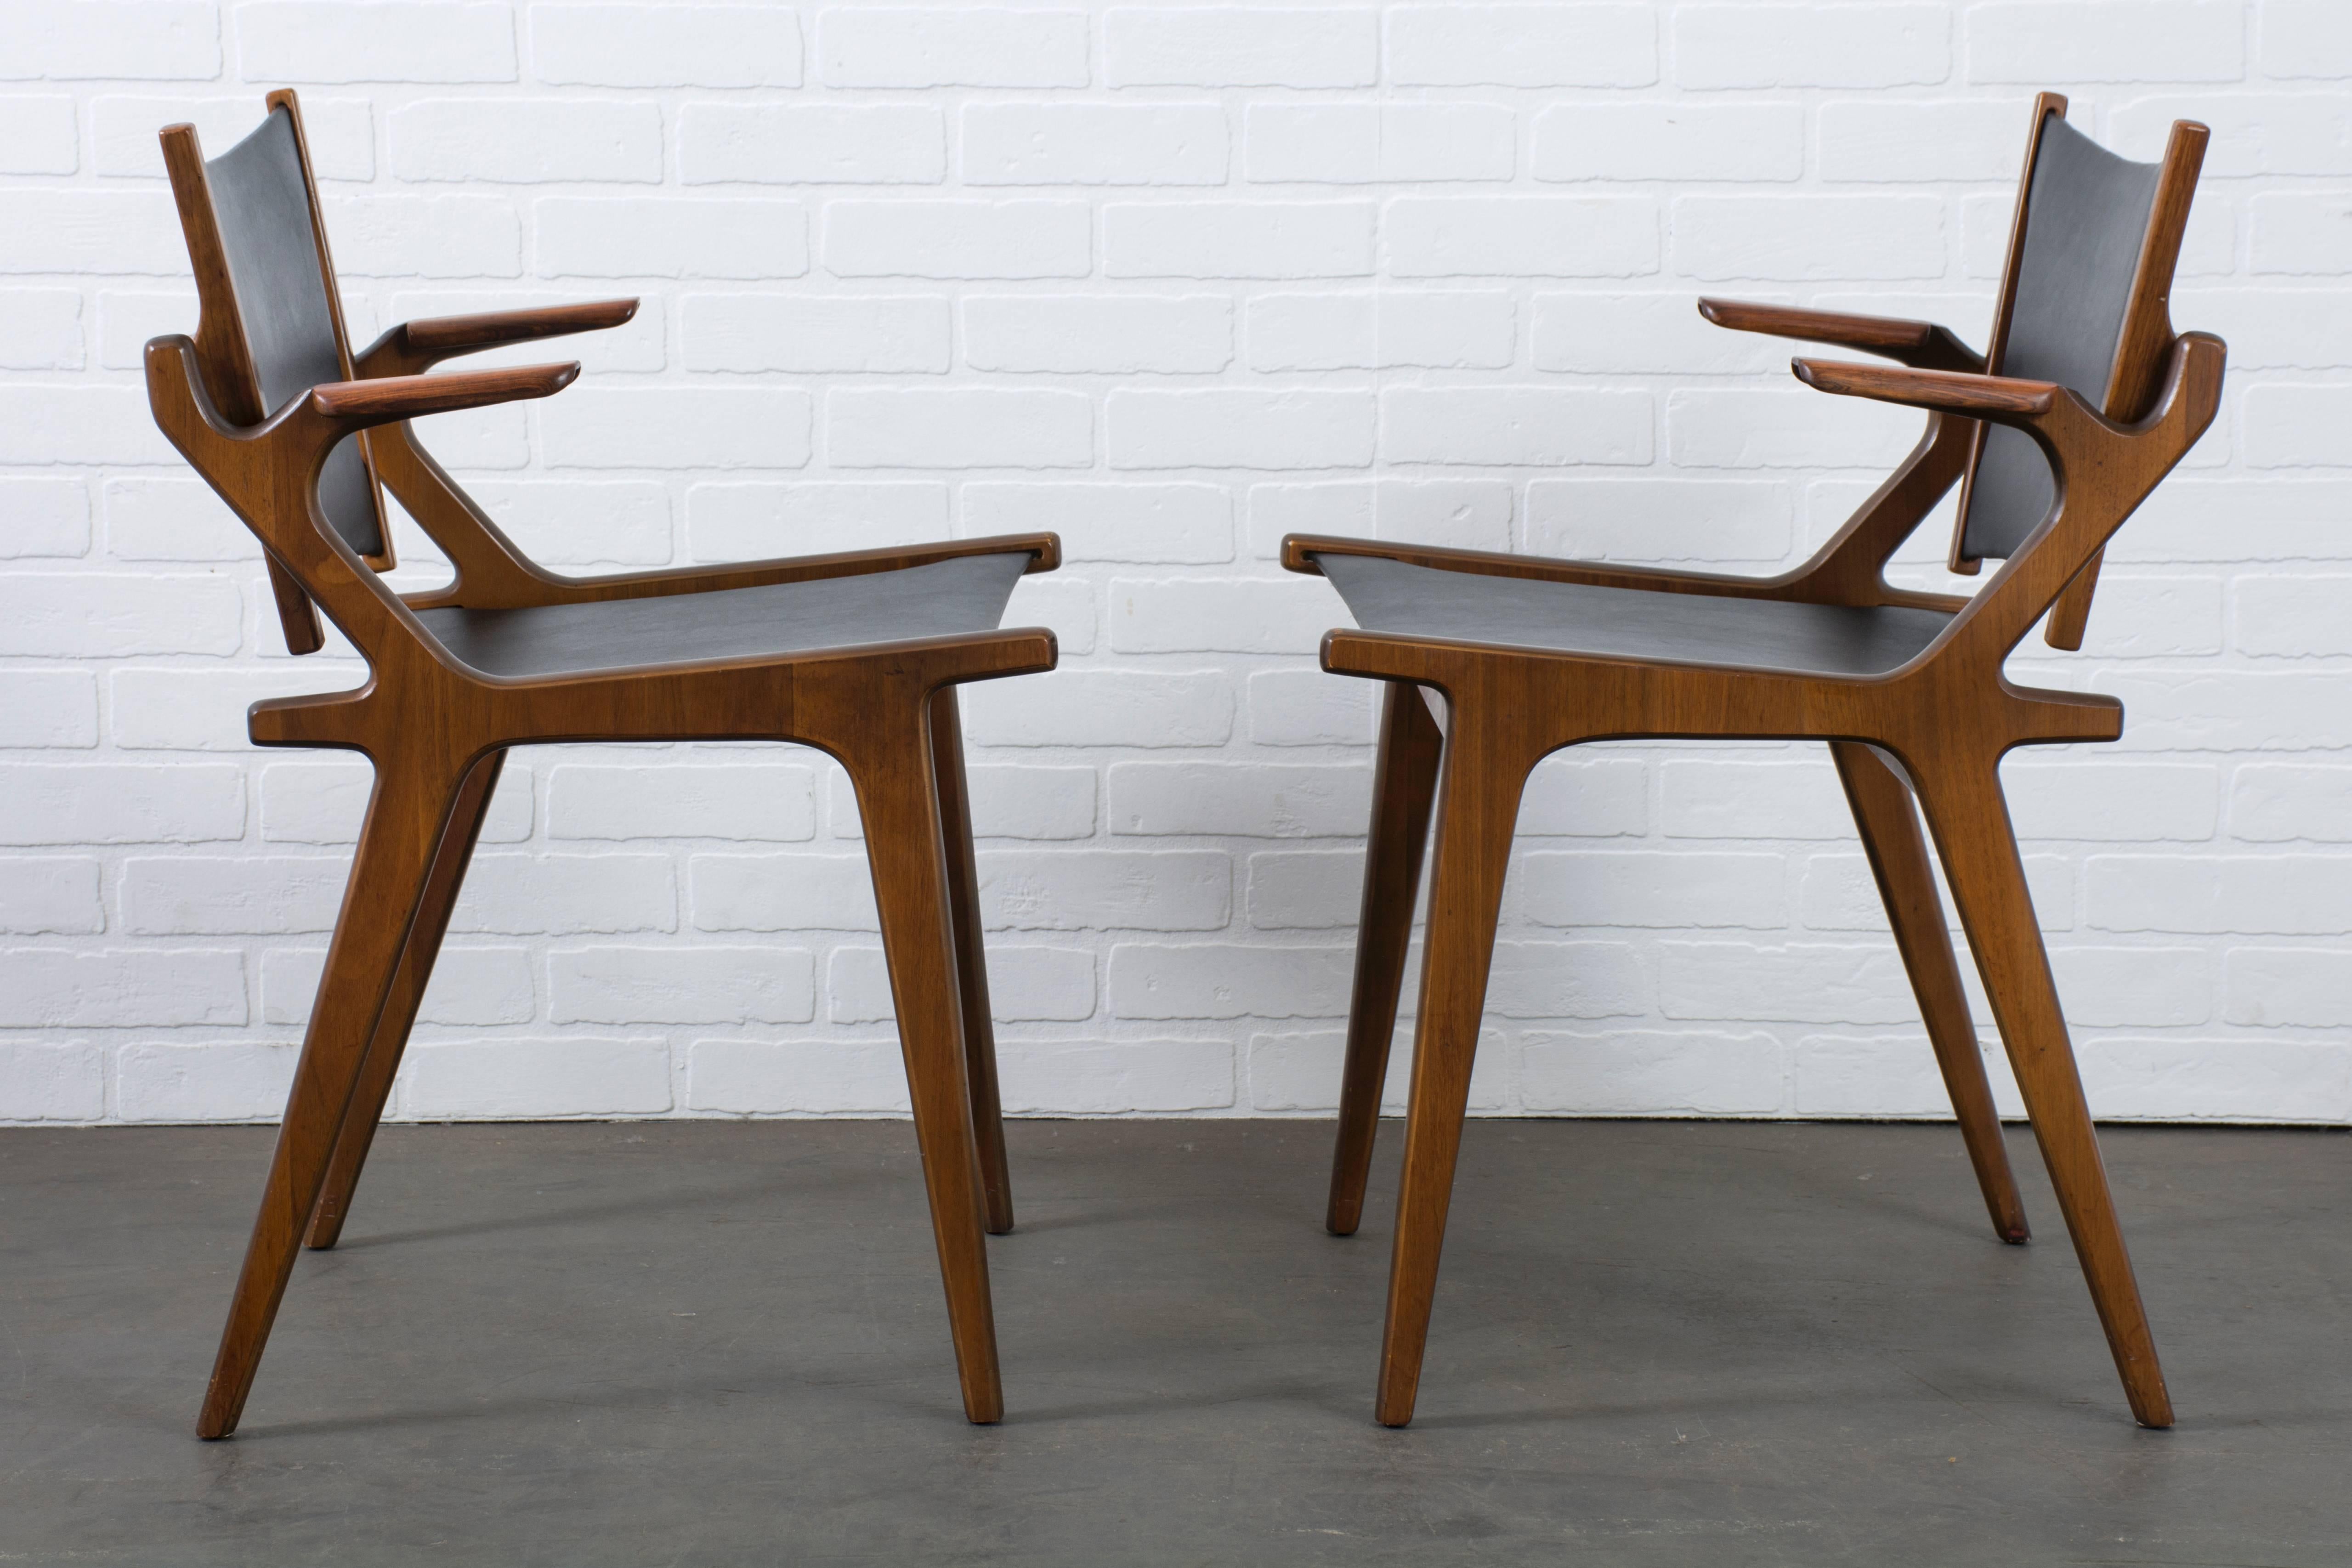 This pair of rare Mid-Century Modern chairs was designed by Richard Thompson for Glenn of California, circa 1960s, USA. They have walnut frames with rosewood arms and the original black Naugahyde upholstery.